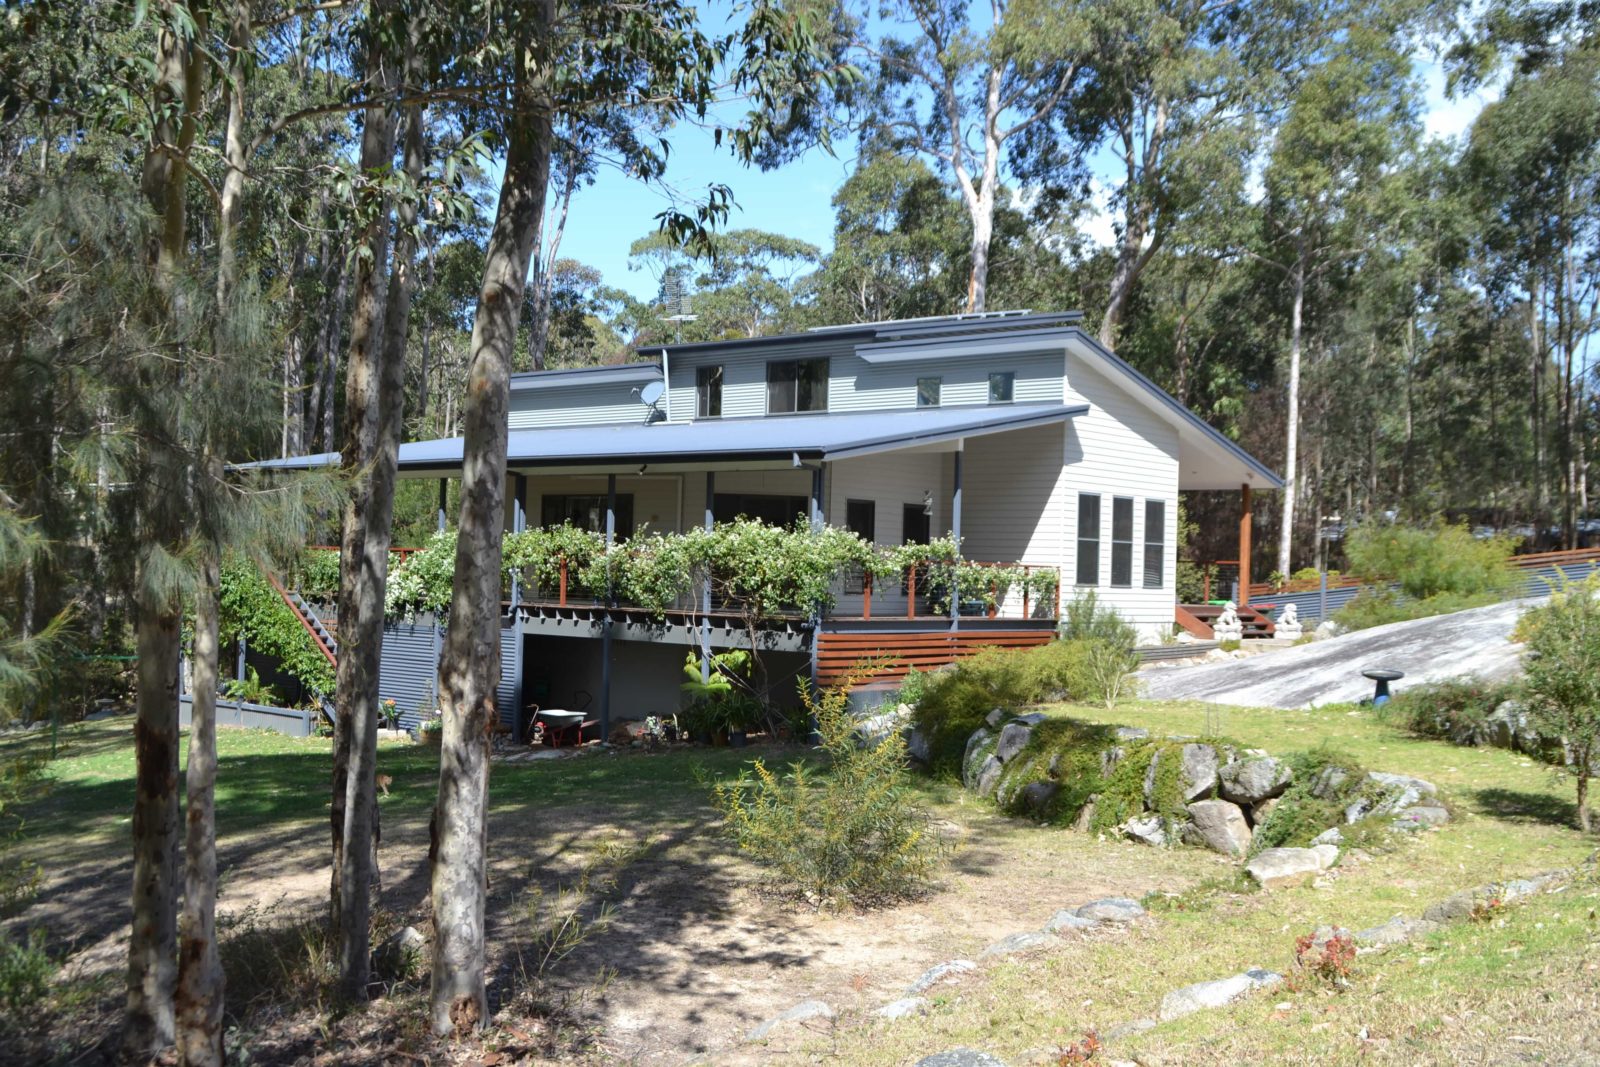 41 The Anchorage, Moruya Heads, 2537 - view from road